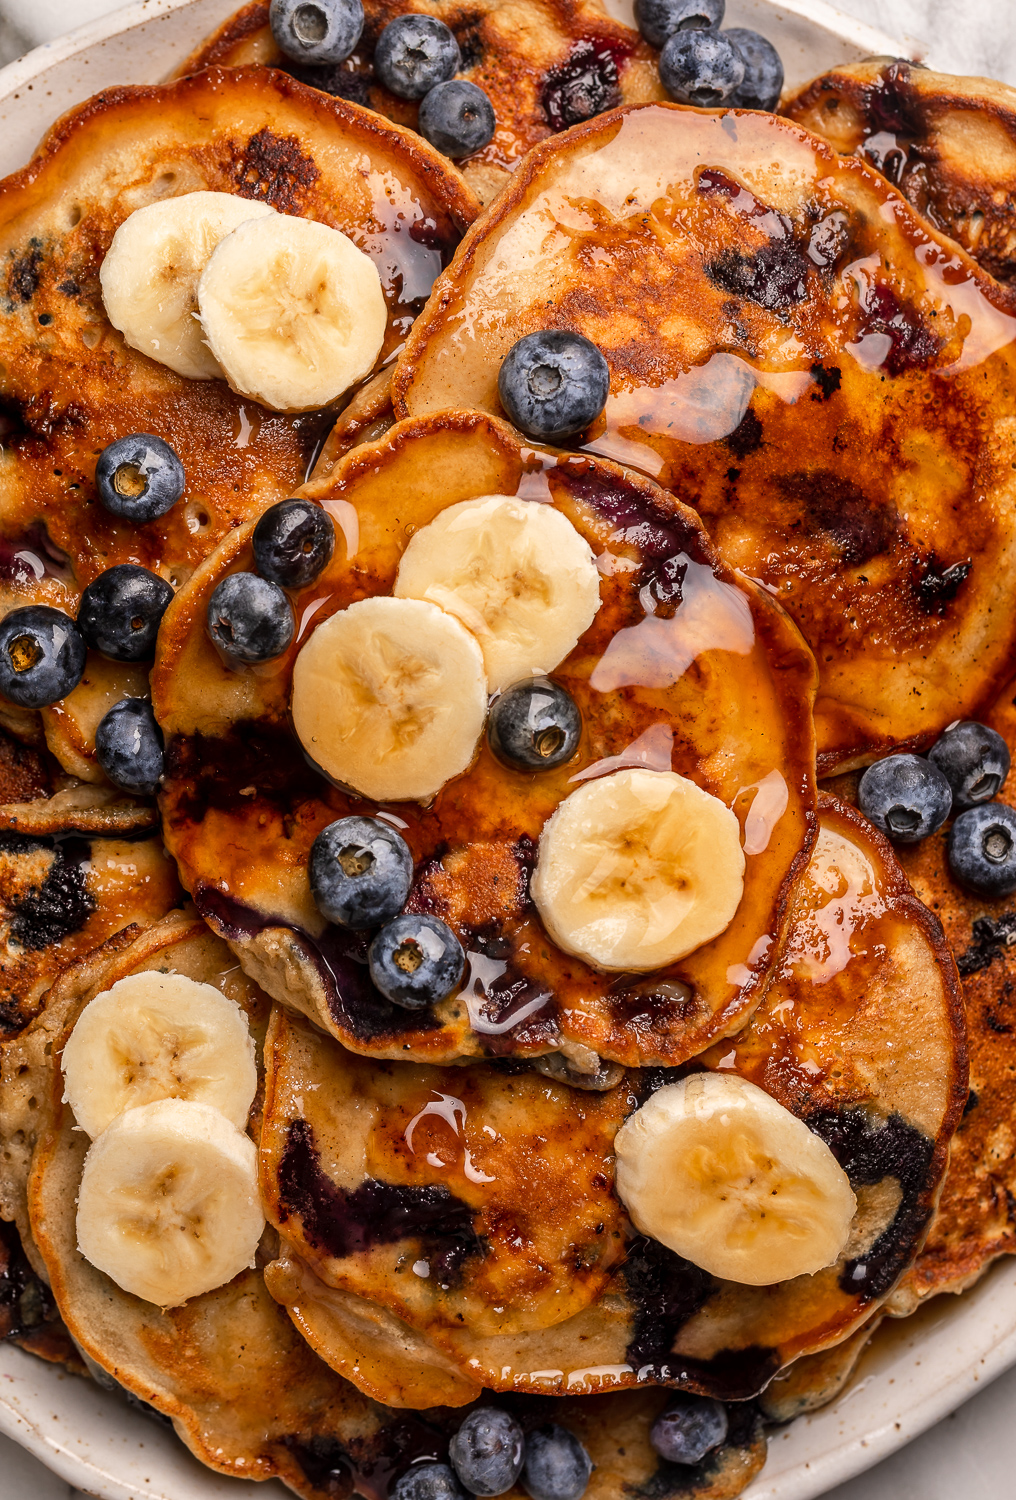 Ripe bananas and fresh blueberries make these Banana Blueberry Pancakes tender, fluffy, and flavorful! The pancake batter comes together in just minutes, and is quickly cooked to golden brown on a hot skillet. Top with maple syrup, extra blueberries, and banana slices for a beautiful breakfast at home!